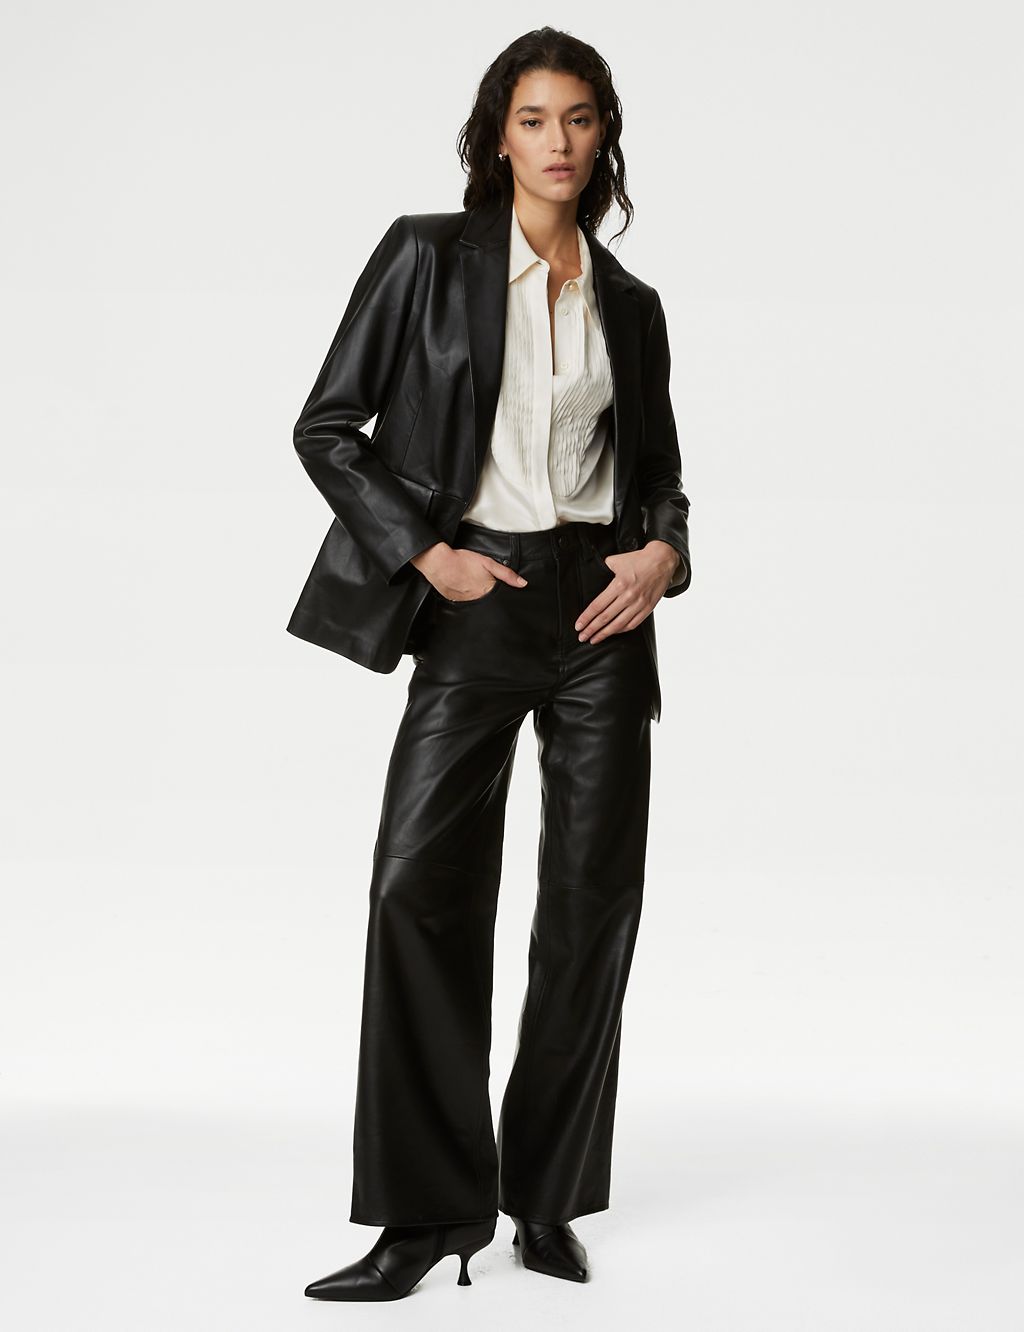 M&S’s Leather Trousers Are Legendary—Now, They’re Back for Winter